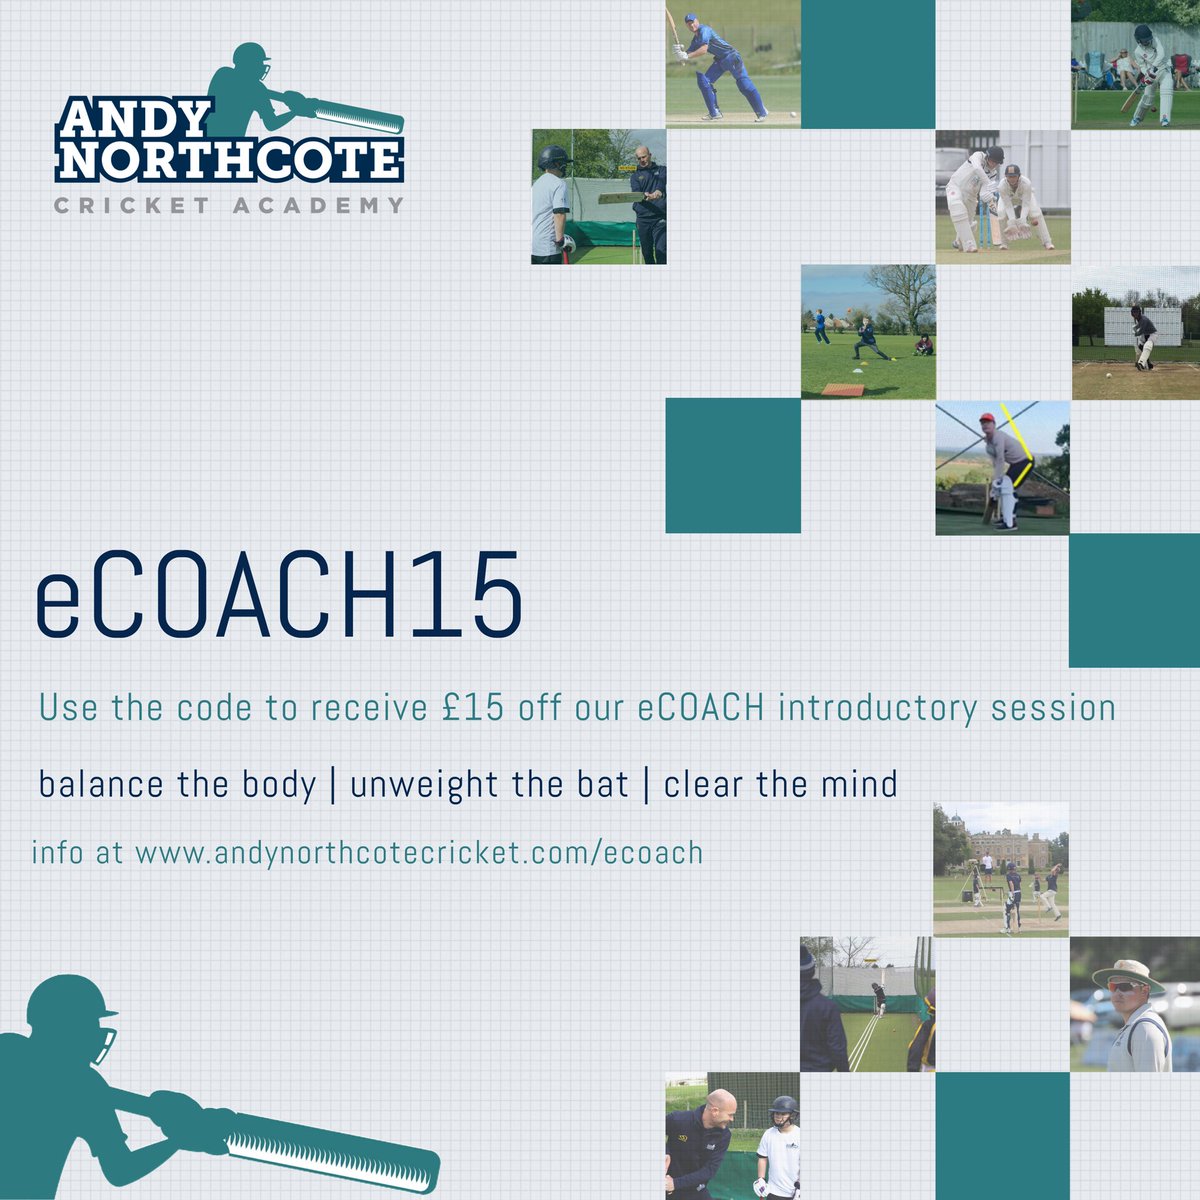 Use the discount code to receive £15 off our eCOACH introductory session

#cricket #cricketathome #eastanglia  #lovecricket #individualcoaching